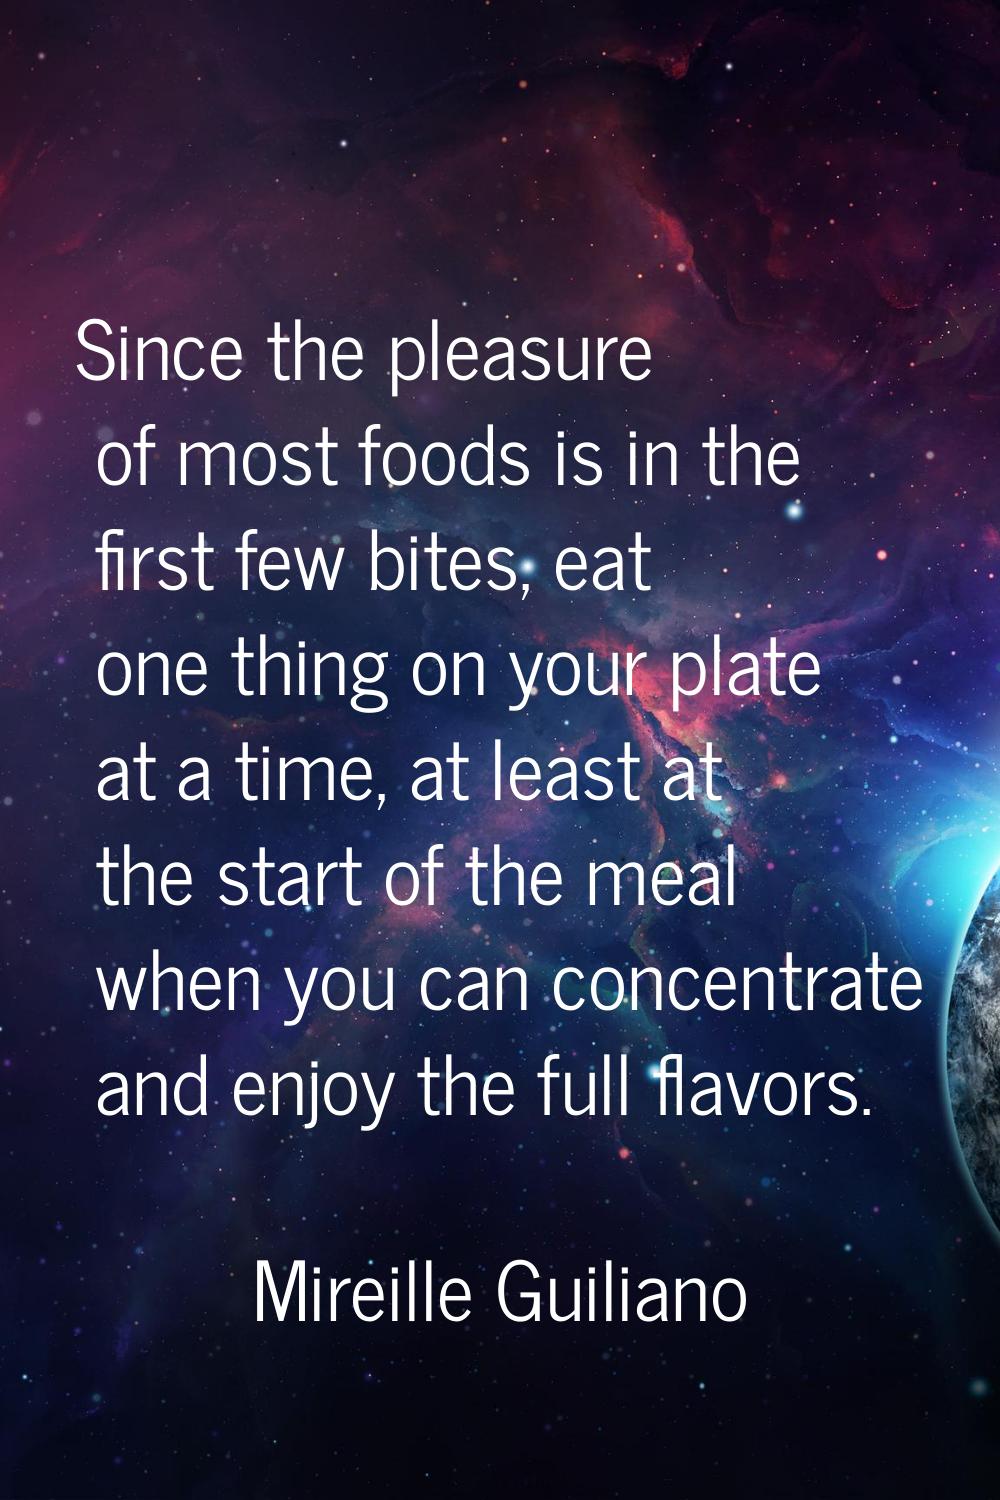 Since the pleasure of most foods is in the first few bites, eat one thing on your plate at a time, 